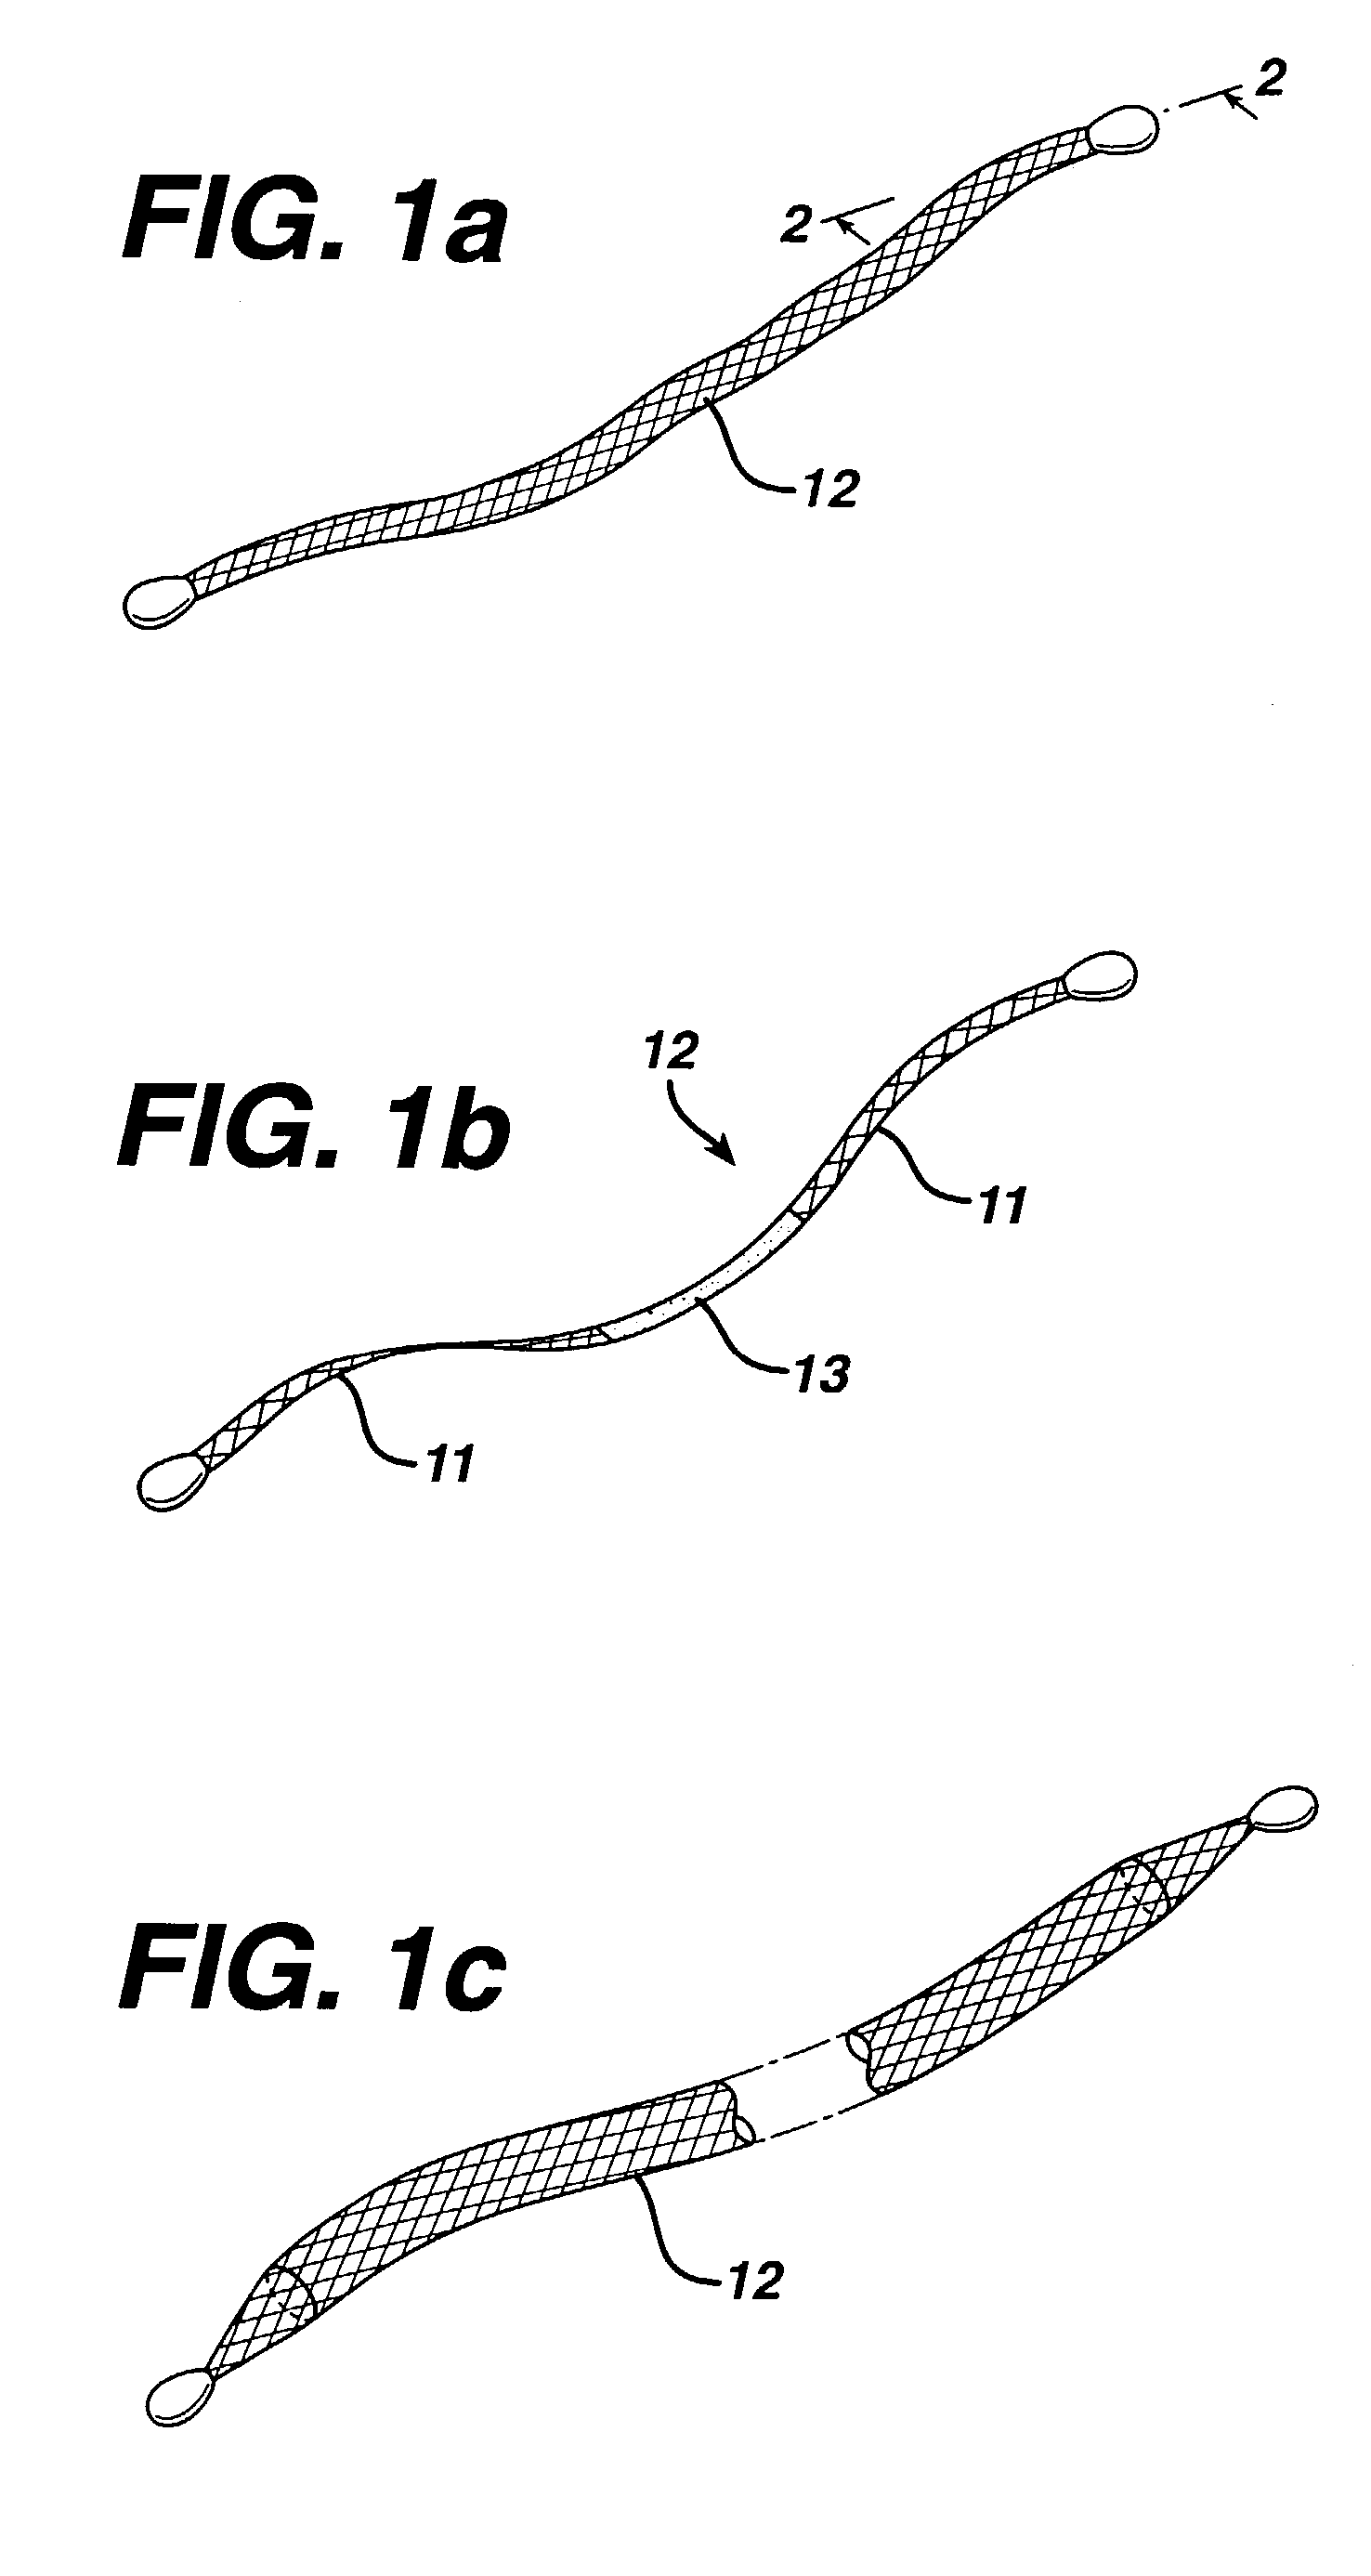 Surgical instrument and method for treating female urinary incontinence